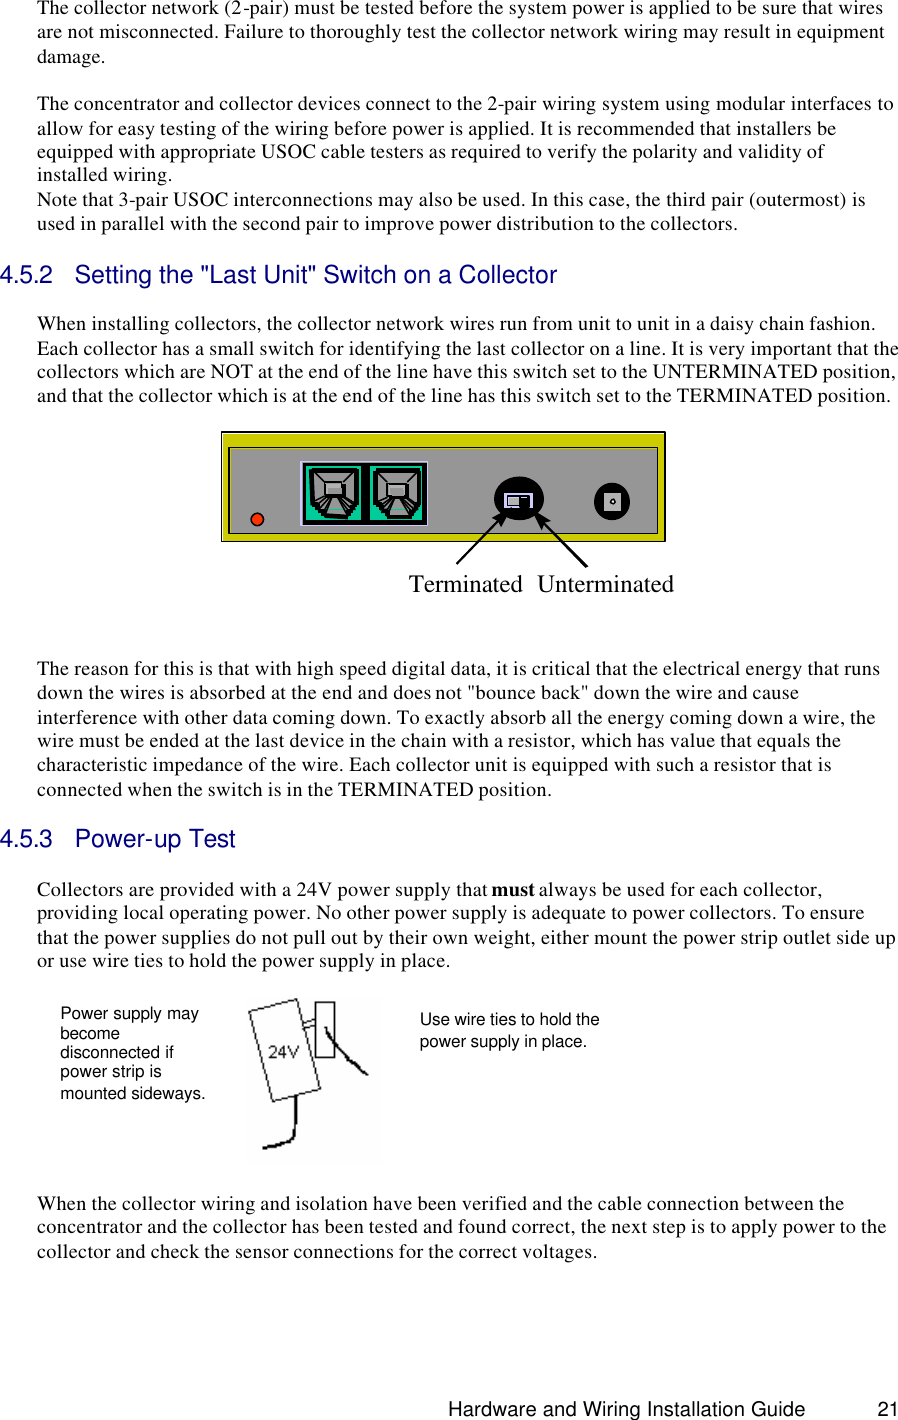                                                                               Hardware and Wiring Installation Guide 21 The collector network (2-pair) must be tested before the system power is applied to be sure that wires are not misconnected. Failure to thoroughly test the collector network wiring may result in equipment damage.  The concentrator and collector devices connect to the 2-pair wiring system using modular interfaces to allow for easy testing of the wiring before power is applied. It is recommended that installers be equipped with appropriate USOC cable testers as required to verify the polarity and validity of installed wiring. Note that 3-pair USOC interconnections may also be used. In this case, the third pair (outermost) is used in parallel with the second pair to improve power distribution to the collectors.  4.5.2 Setting the &quot;Last Unit&quot; Switch on a Collector  When installing collectors, the collector network wires run from unit to unit in a daisy chain fashion. Each collector has a small switch for identifying the last collector on a line. It is very important that the collectors which are NOT at the end of the line have this switch set to the UNTERMINATED position, and that the collector which is at the end of the line has this switch set to the TERMINATED position.    Terminated Unterminated  The reason for this is that with high speed digital data, it is critical that the electrical energy that runs down the wires is absorbed at the end and does not &quot;bounce back&quot; down the wire and cause interference with other data coming down. To exactly absorb all the energy coming down a wire, the wire must be ended at the last device in the chain with a resistor, which has value that equals the characteristic impedance of the wire. Each collector unit is equipped with such a resistor that is connected when the switch is in the TERMINATED position.  4.5.3 Power-up Test  Collectors are provided with a 24V power supply that must always be used for each collector, providing local operating power. No other power supply is adequate to power collectors. To ensure that the power supplies do not pull out by their own weight, either mount the power strip outlet side up or use wire ties to hold the power supply in place.                  When the collector wiring and isolation have been verified and the cable connection between the concentrator and the collector has been tested and found correct, the next step is to apply power to the collector and check the sensor connections for the correct voltages.    Power supply may become disconnected if power strip is mounted sideways. Use wire ties to hold the power supply in place.  